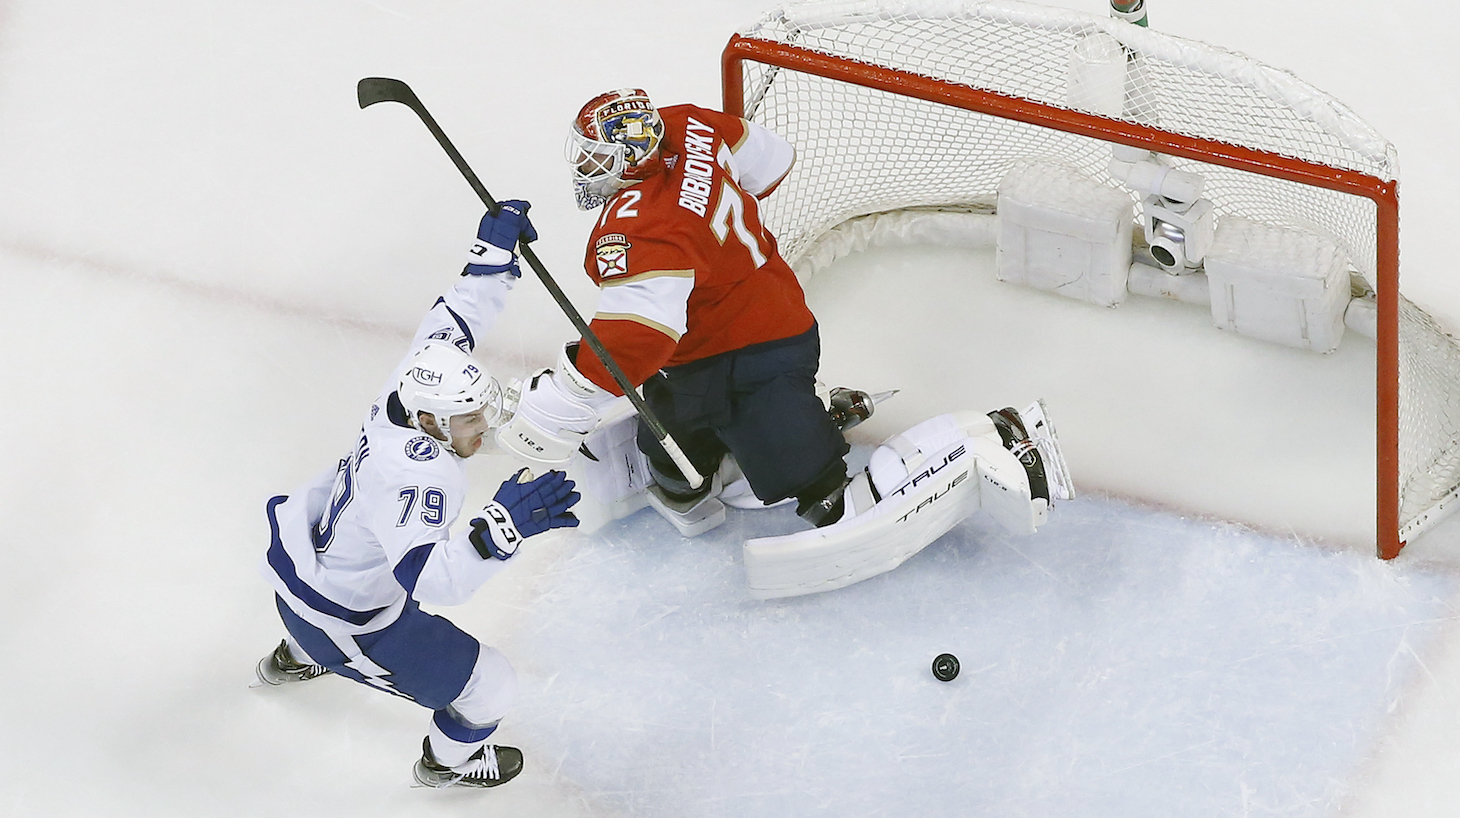 SUNRISE, FL - MAY 19: Ross Colton #79 of the Tampa Bay Lightning raises his stick after scoring the go ahead goal against Goaltender Sergei Bobrovsky #72 of the Florida Panthers in Game Two of the Second Round of the 2022 NHL Stanley Cup Playoffs at the FLA Live Arena on May 19, 2022 in Sunrise, Florida. The Lightning defeated the Panthers 2-1. (Photo by Joel Auerbach/Getty Images) *** Local Caption *** Ross Colton;Sergei Bobrovsky